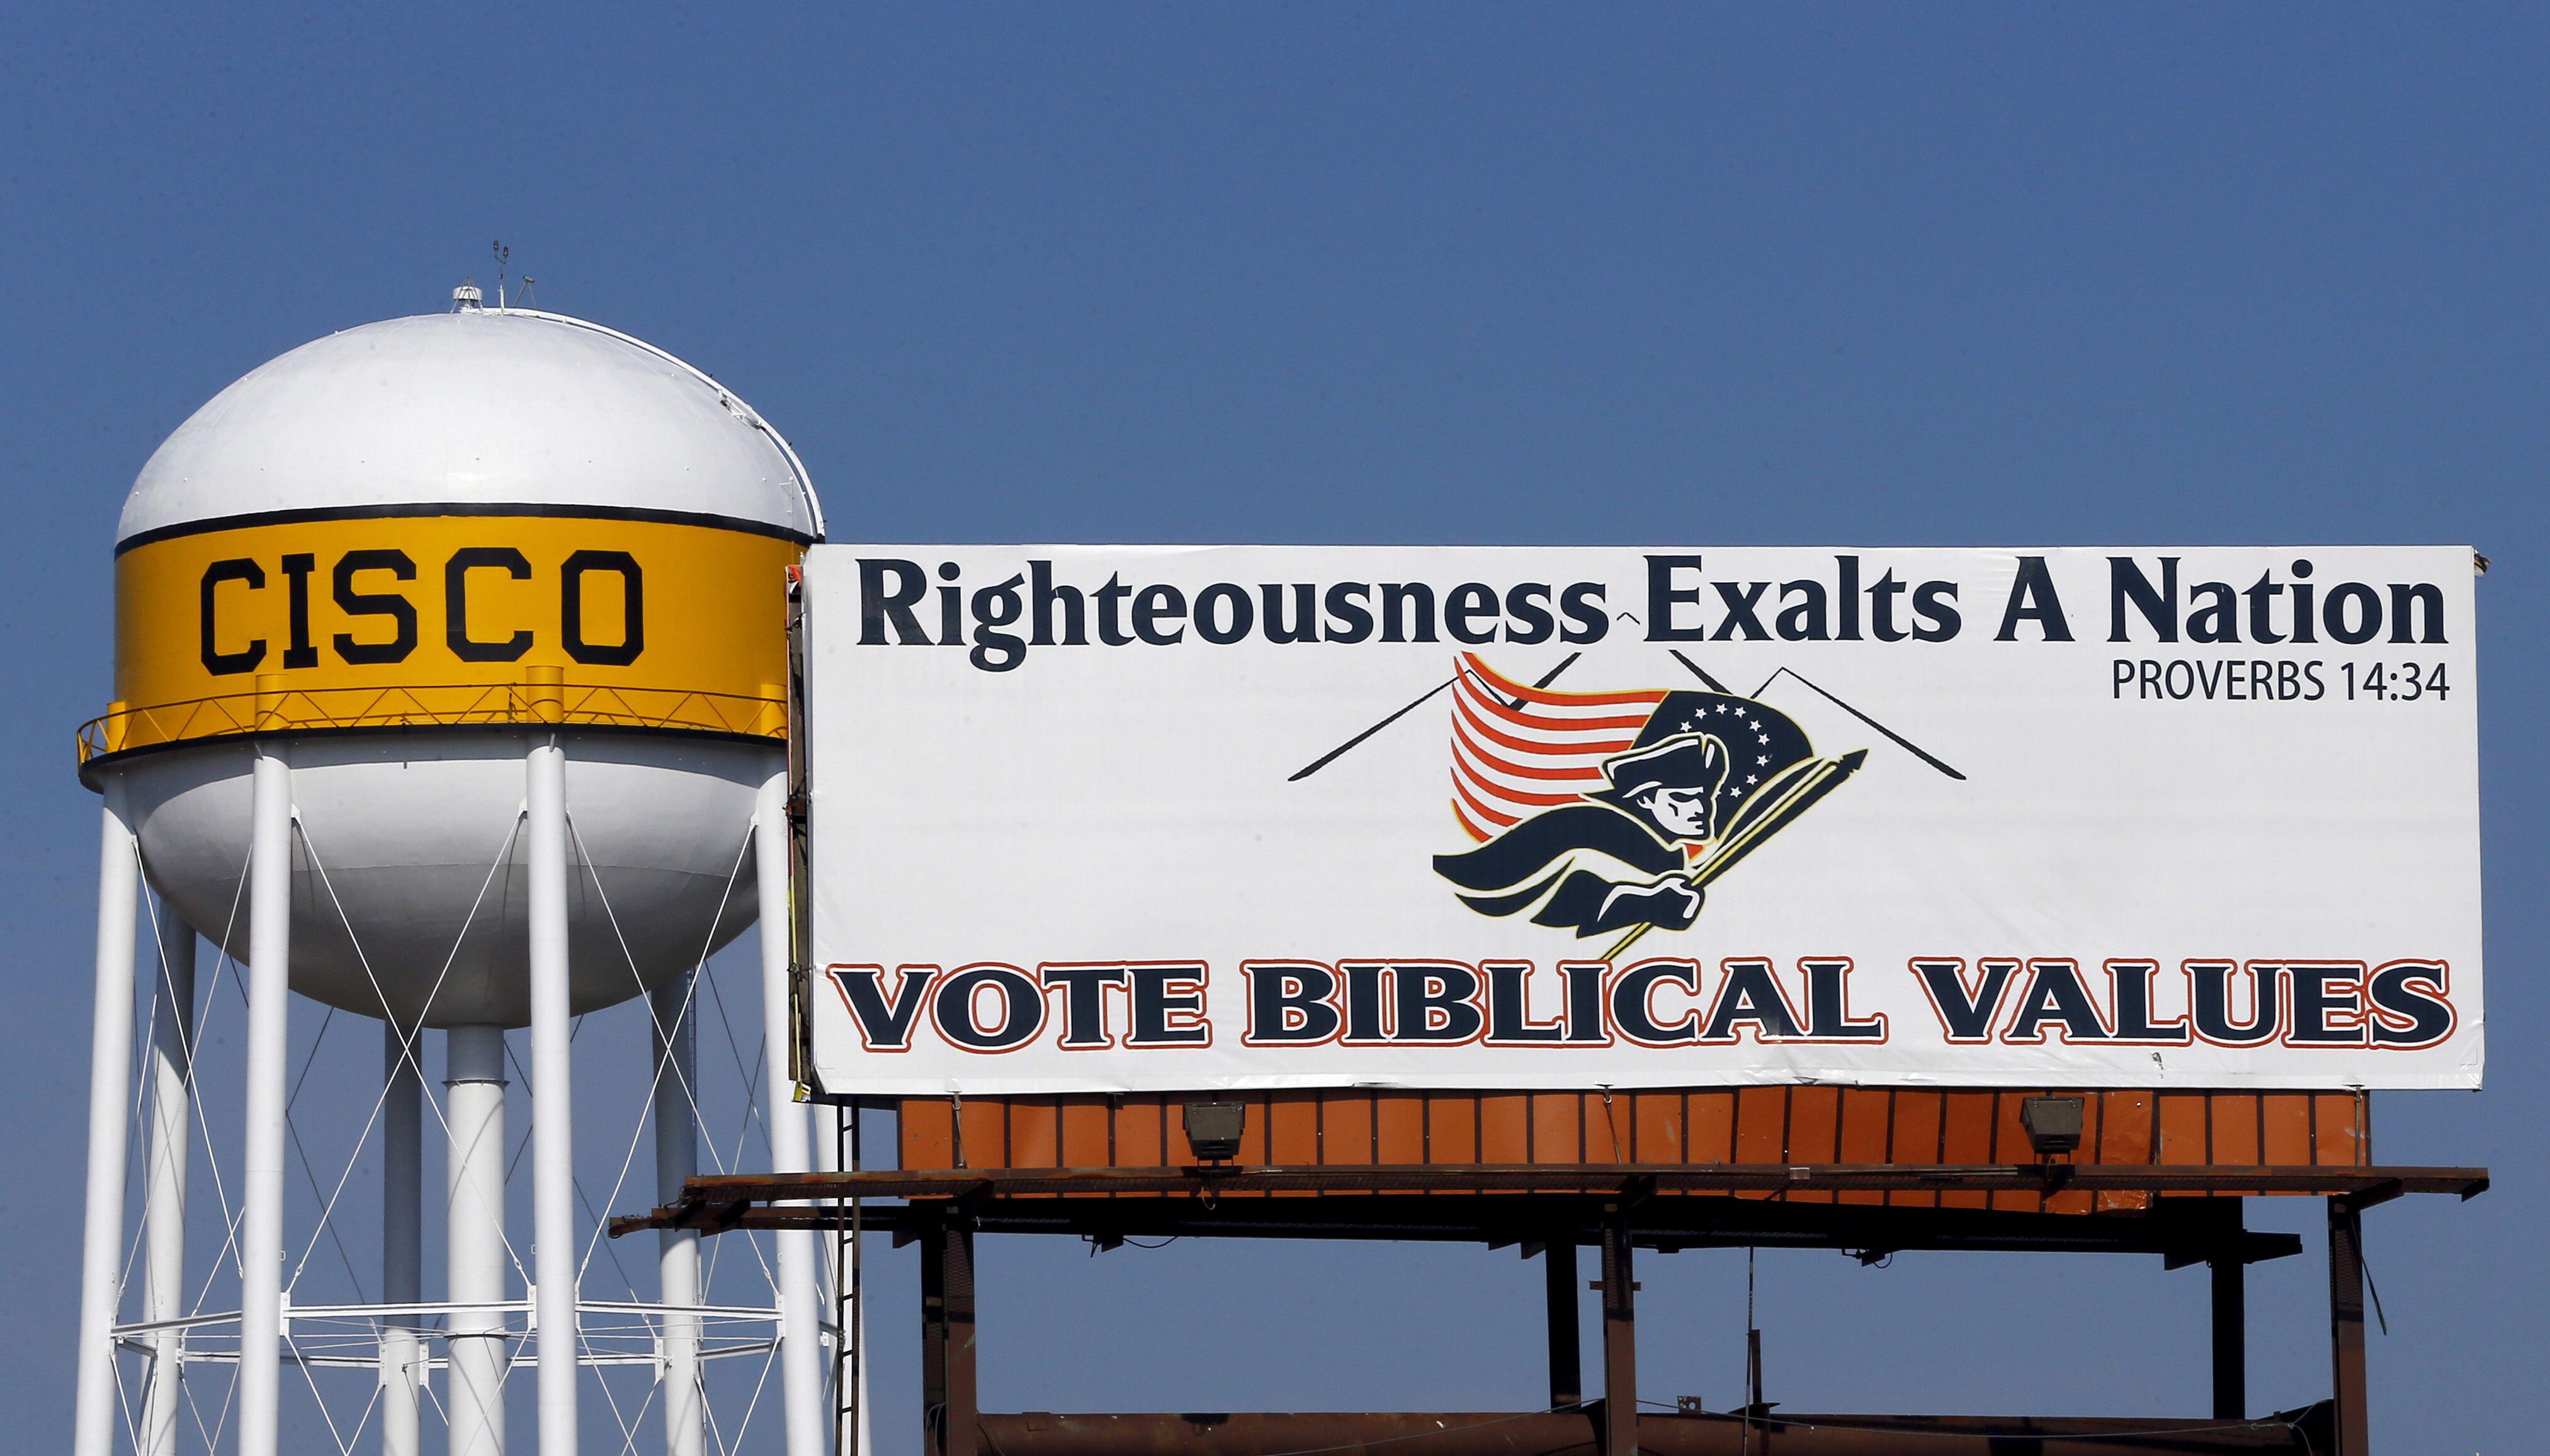 A billboard urging consideration of biblical values when voting is displayed in Cisco, Texas, near where Farris Wilks preaches, in August 2015. Photo by 